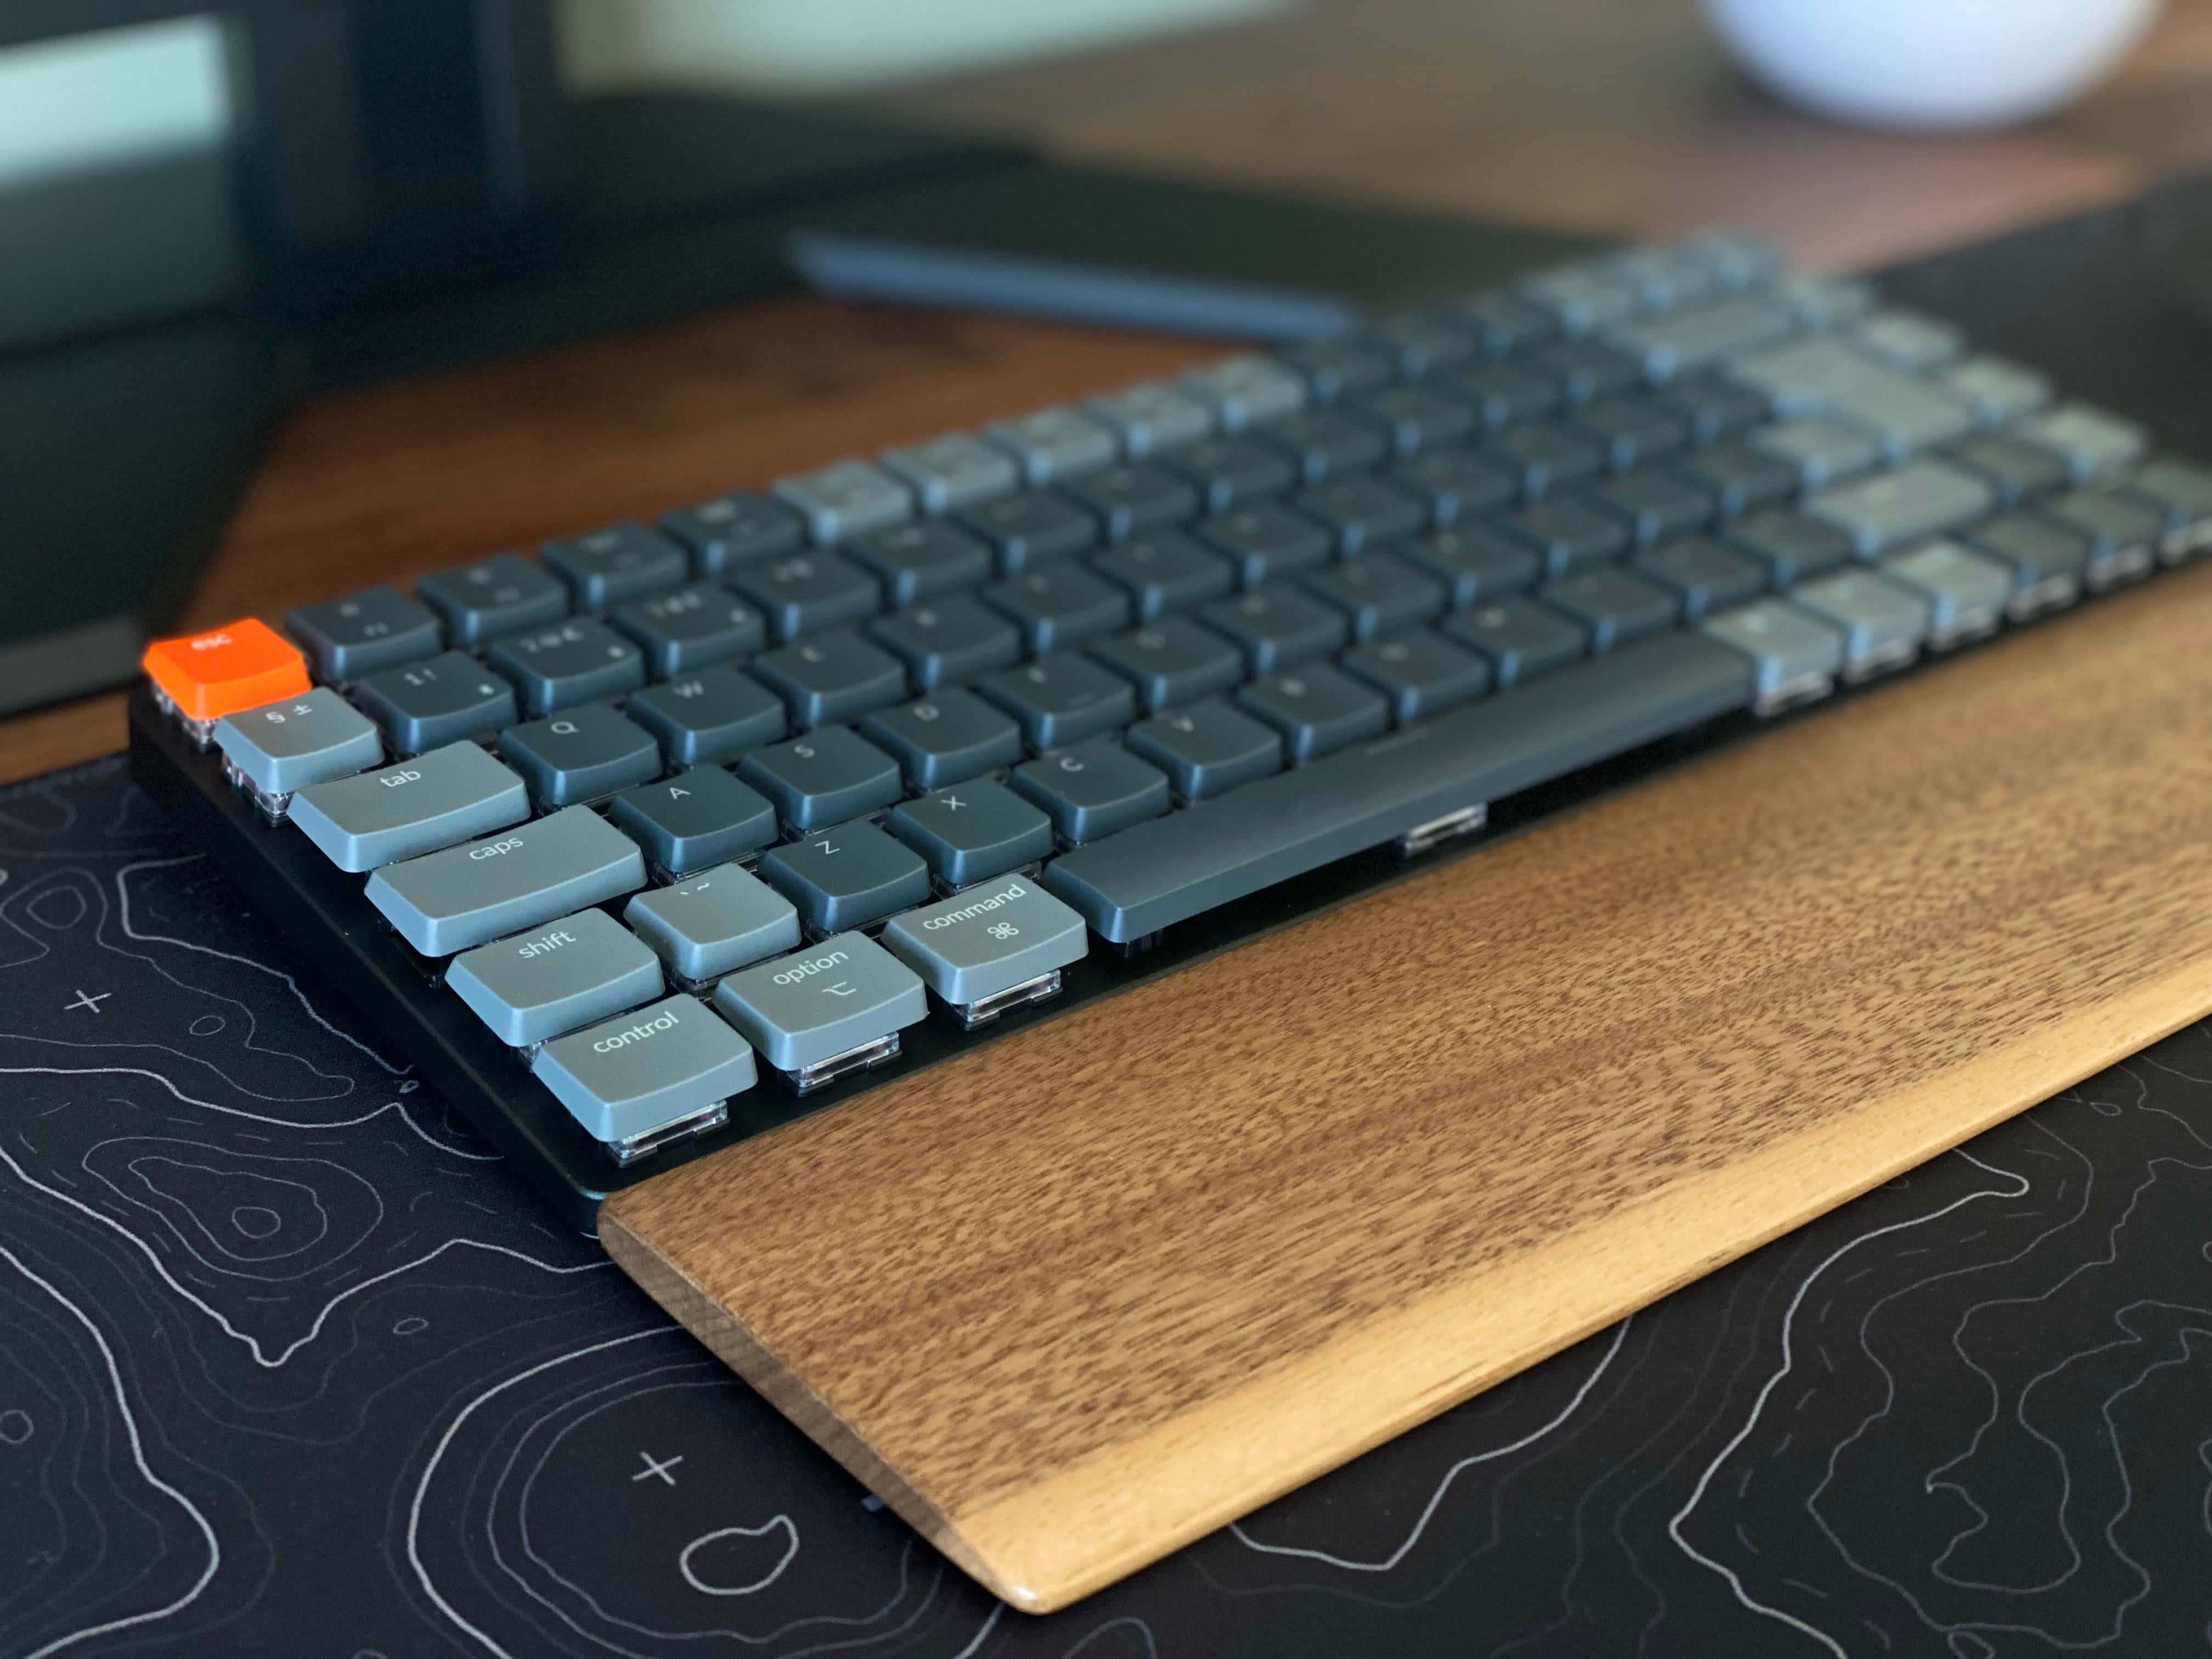 We like the wooden wrist rest with that Keychron K3 mechanical keyboard. 